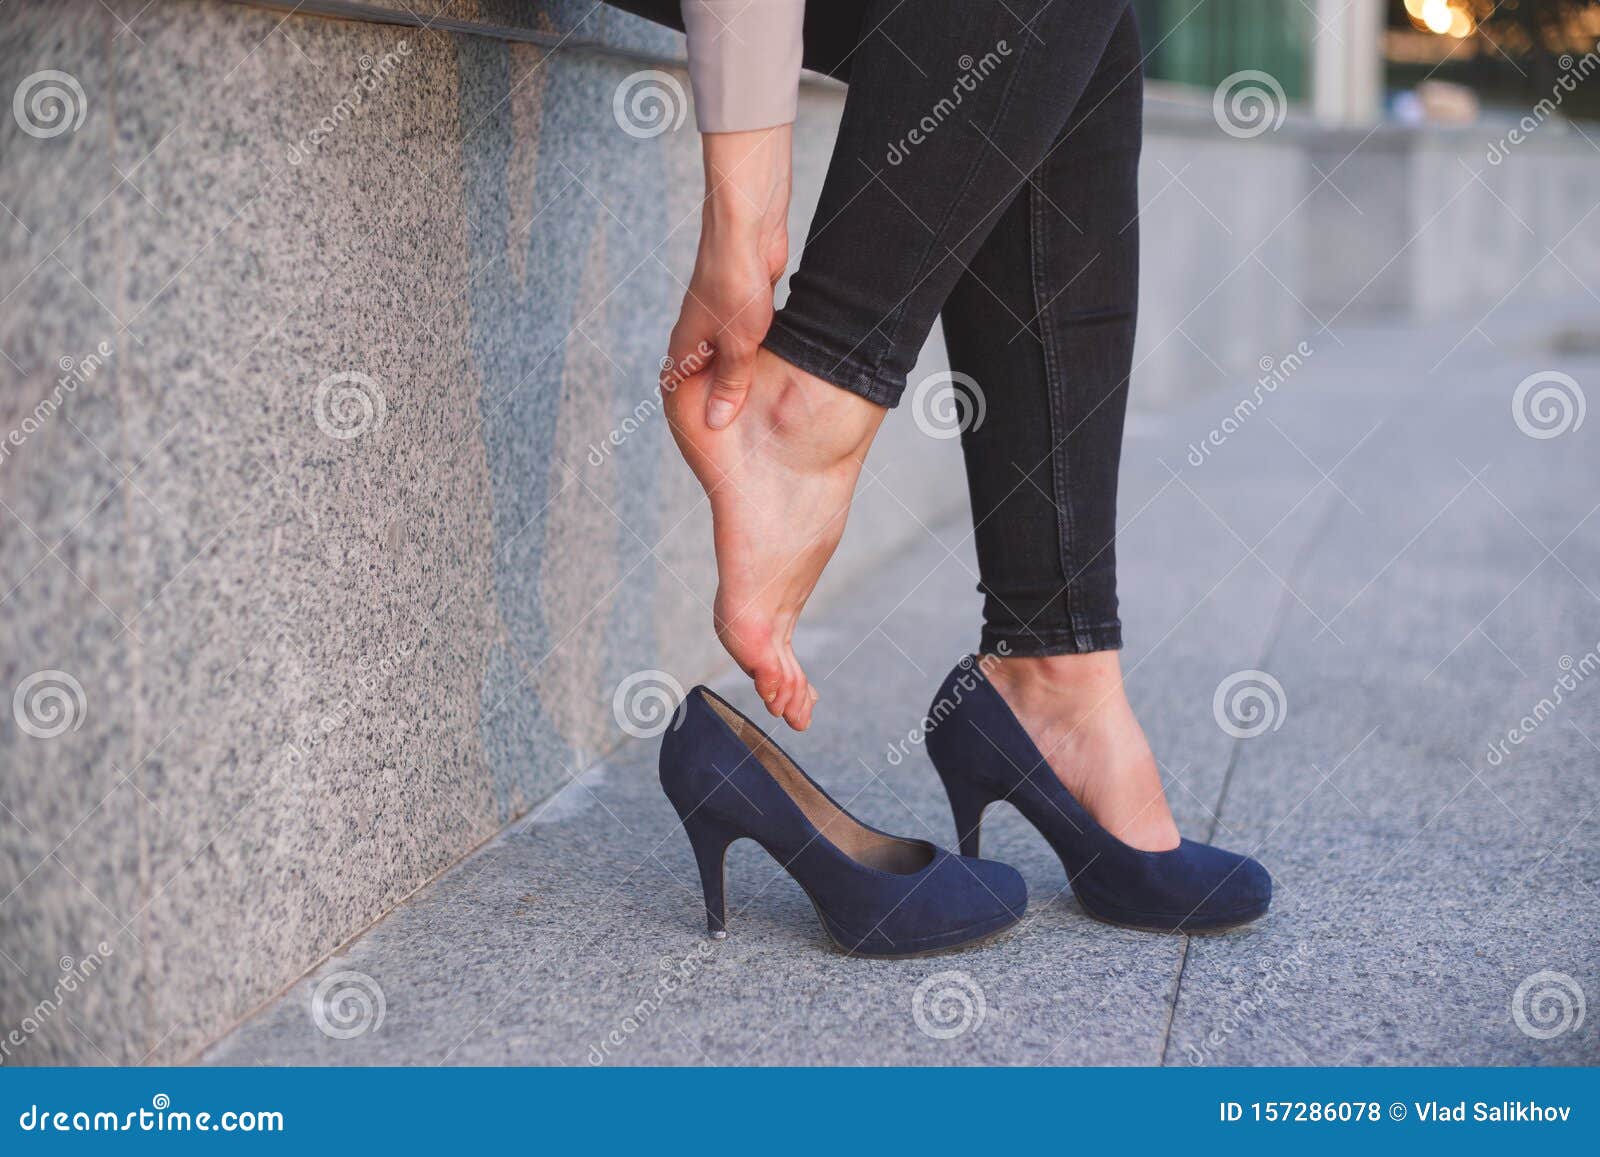 New Study Shows High Heels are Biggest Culprit of Female Foot Pain